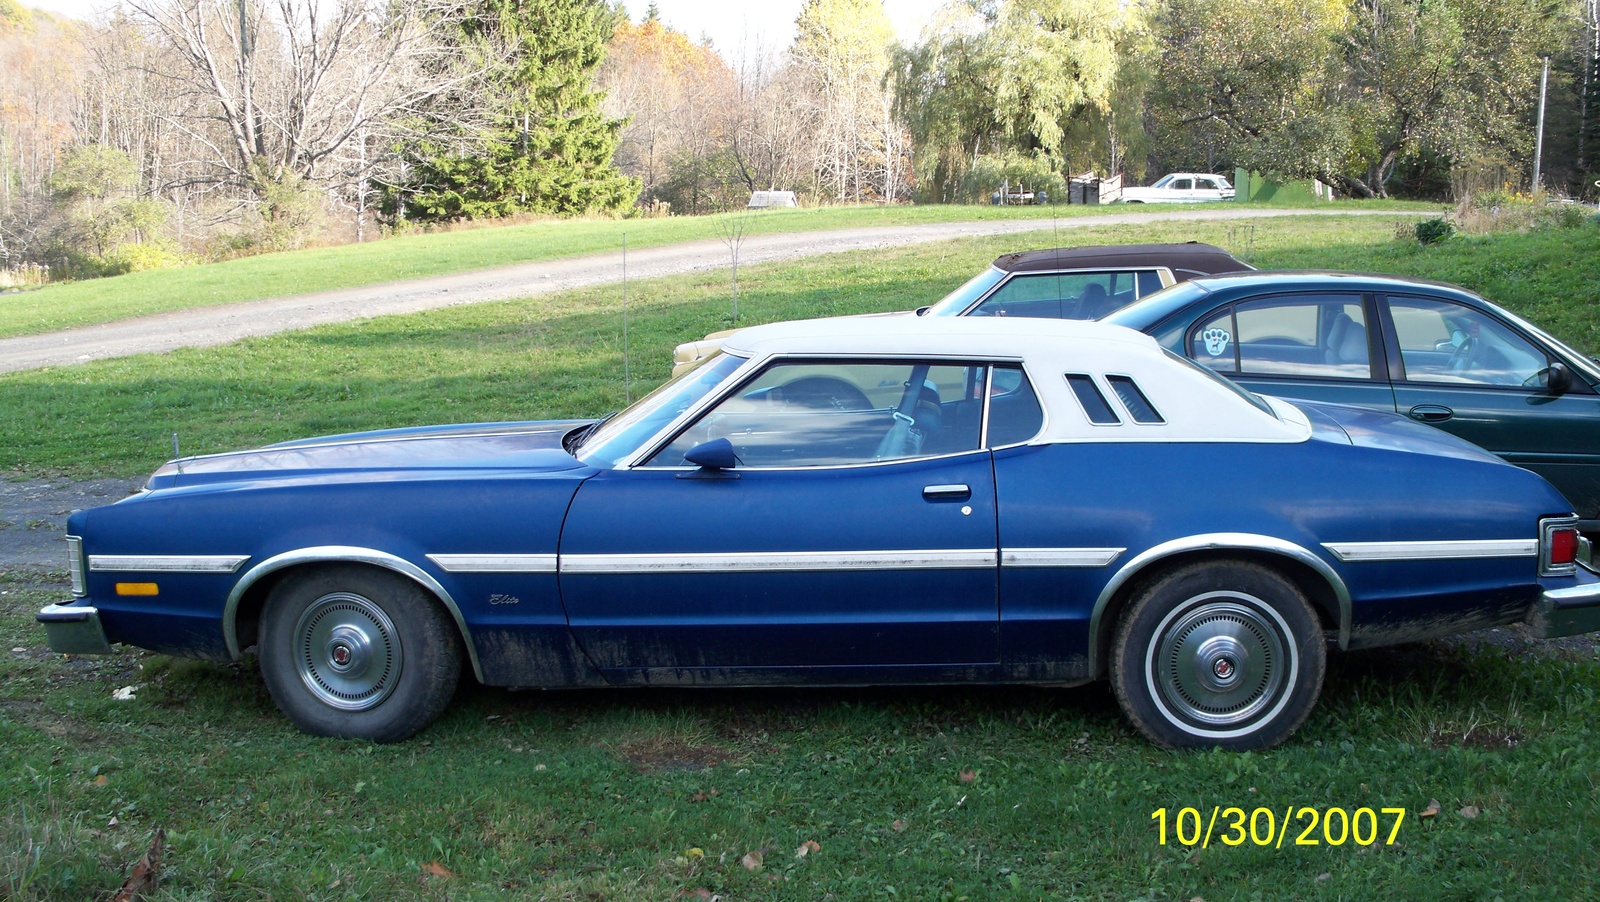 Used 1975 ford elite for sale #5